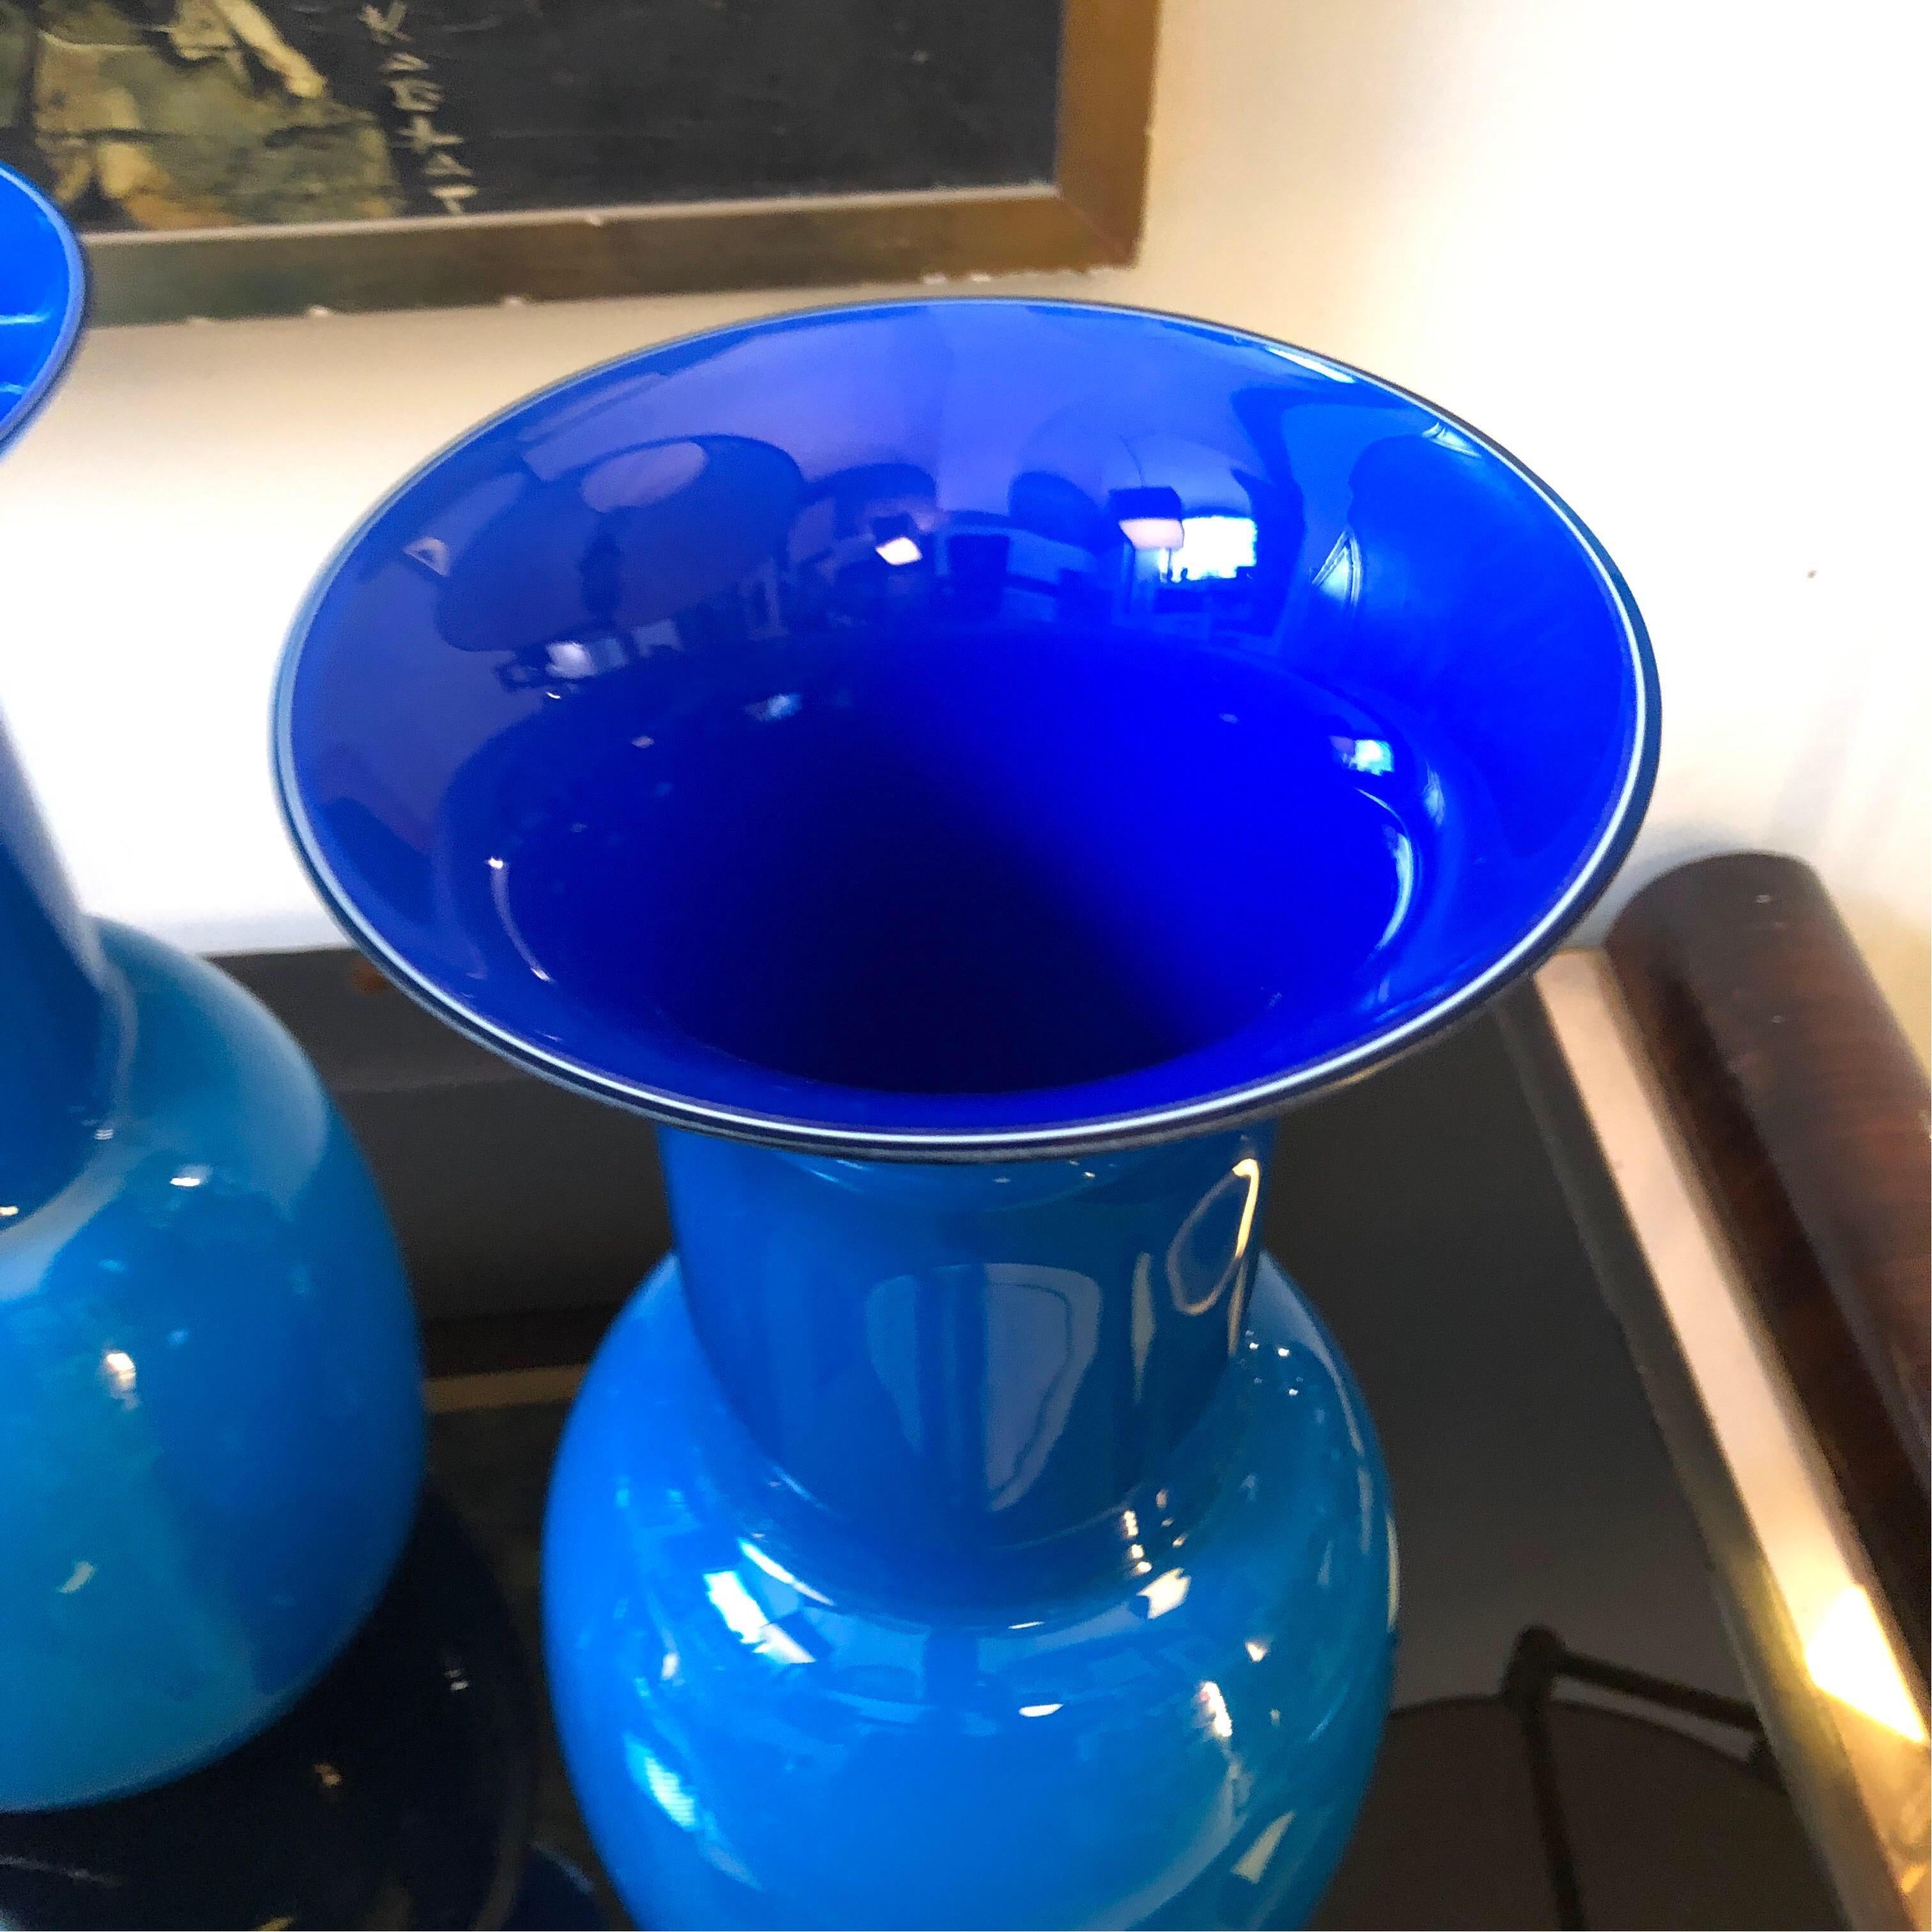 Two opaline Murano glass vases made in Italy by Aureliano Toso, signed on the bottom Aureliano Toso, 2000.